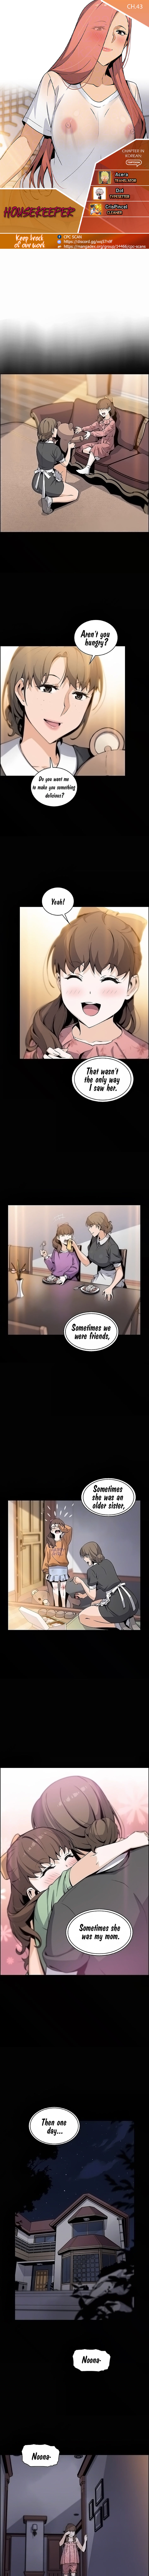 Housekeeper Manhwa - Chapter 43 Page 1